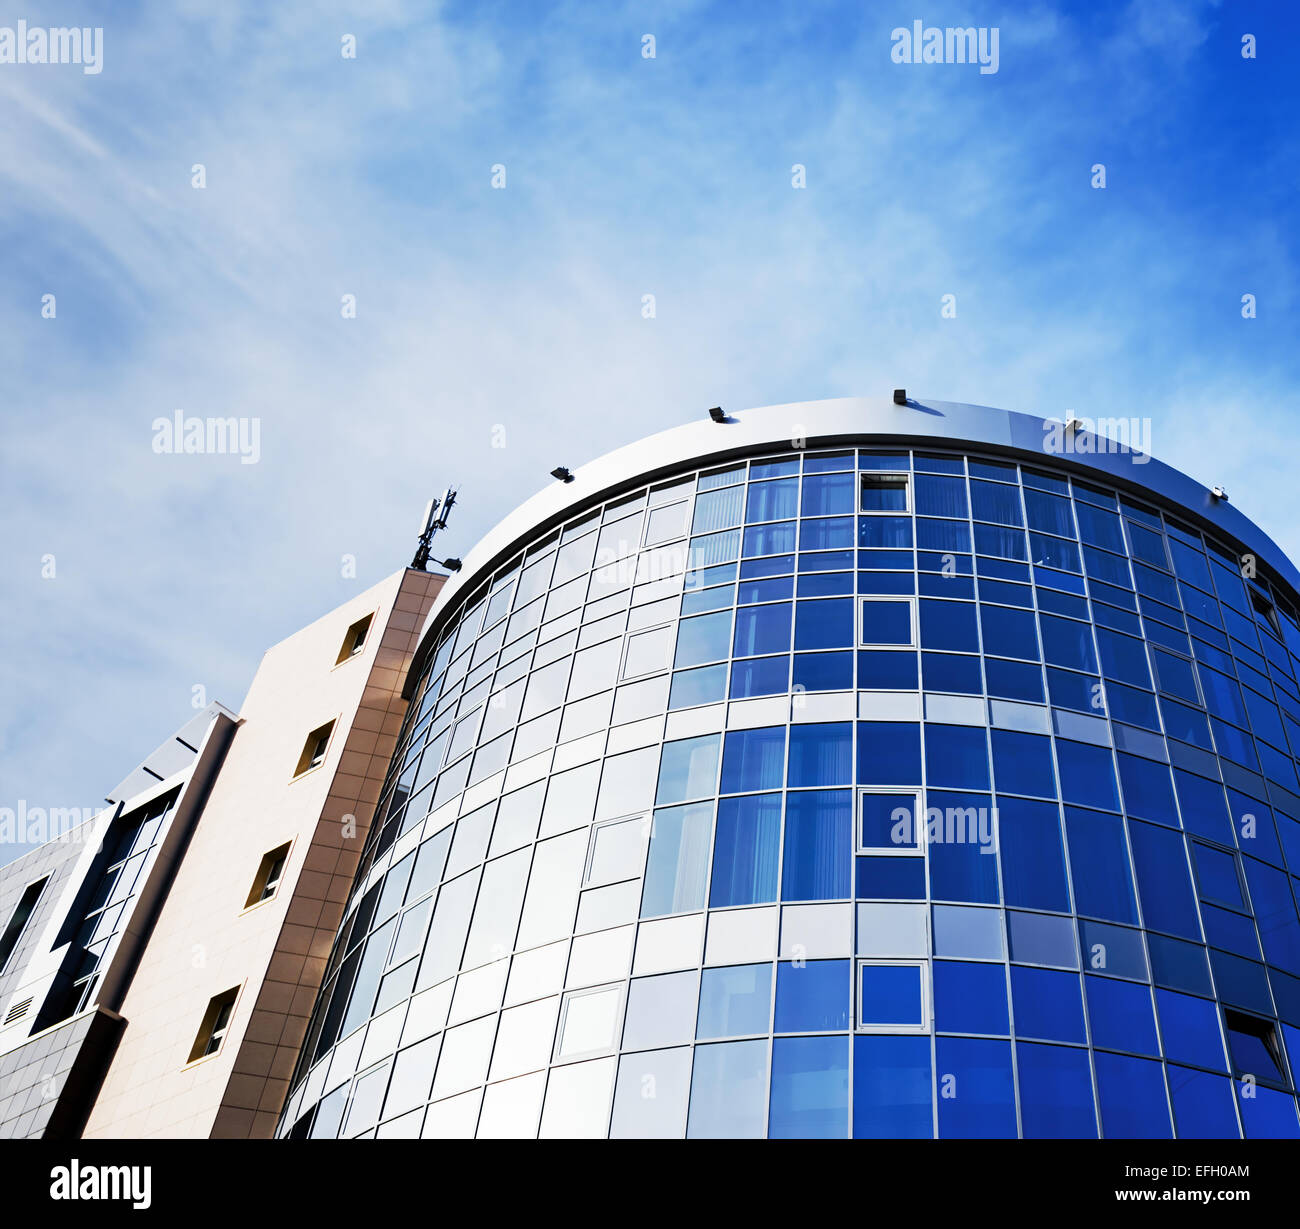 Modern office building made of glass and steel Stock Photo